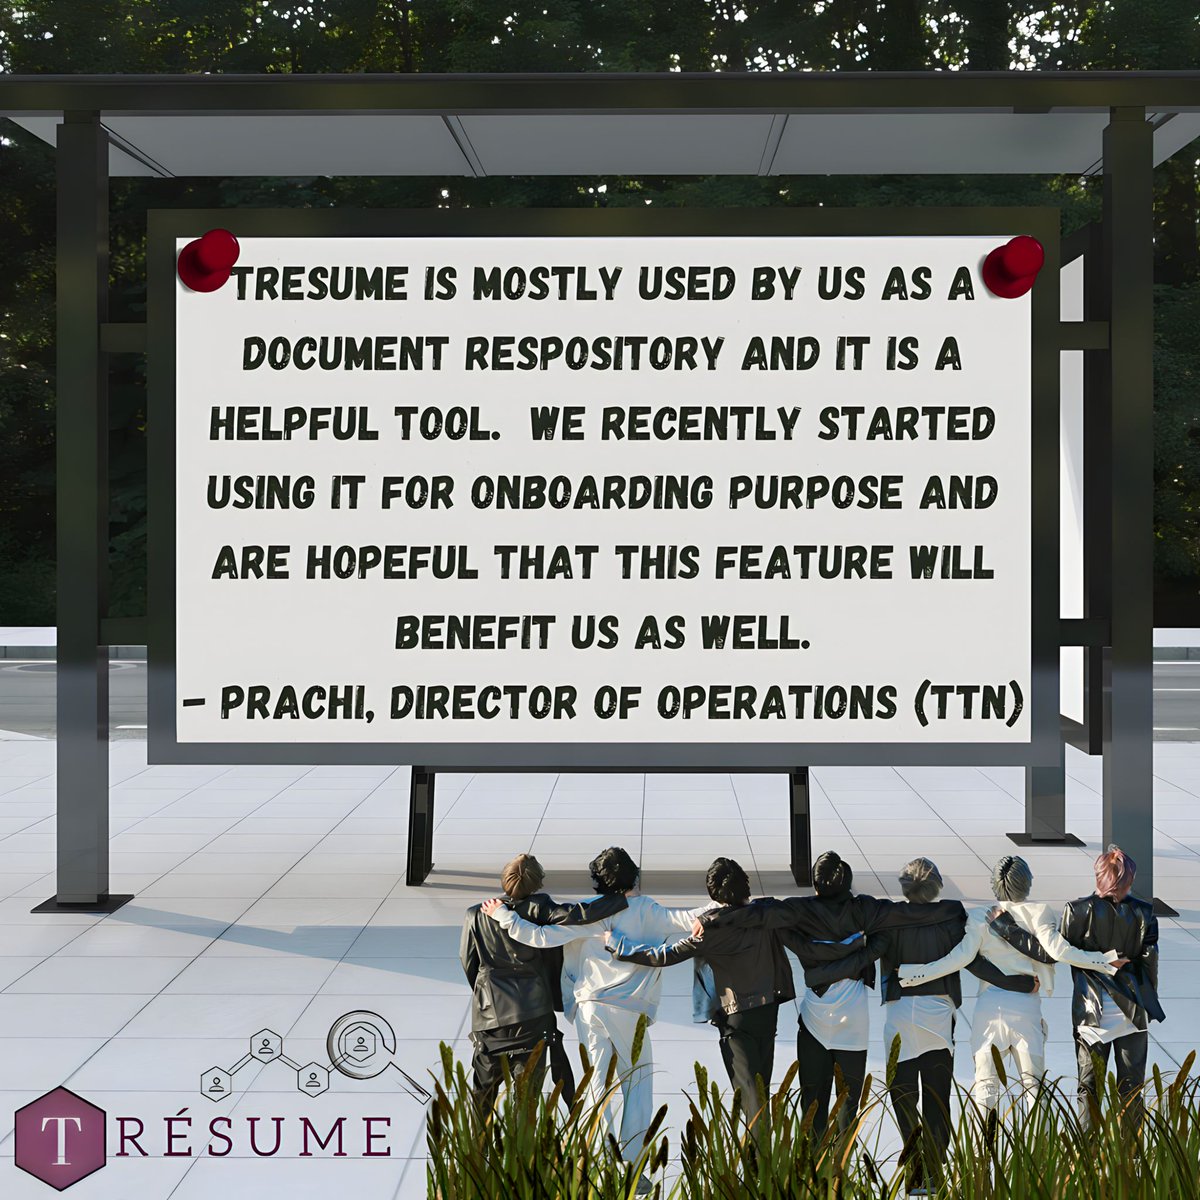 Thank you, Prachi(Director of Operations), for giving us valuable feedback about Tresume.
#tresume #feedback #hiring #hr #jobsearch #recruitment #nowhiring #recruiting #jobs #applicanttrackingsystem #recruitingsoftware #hiringtools